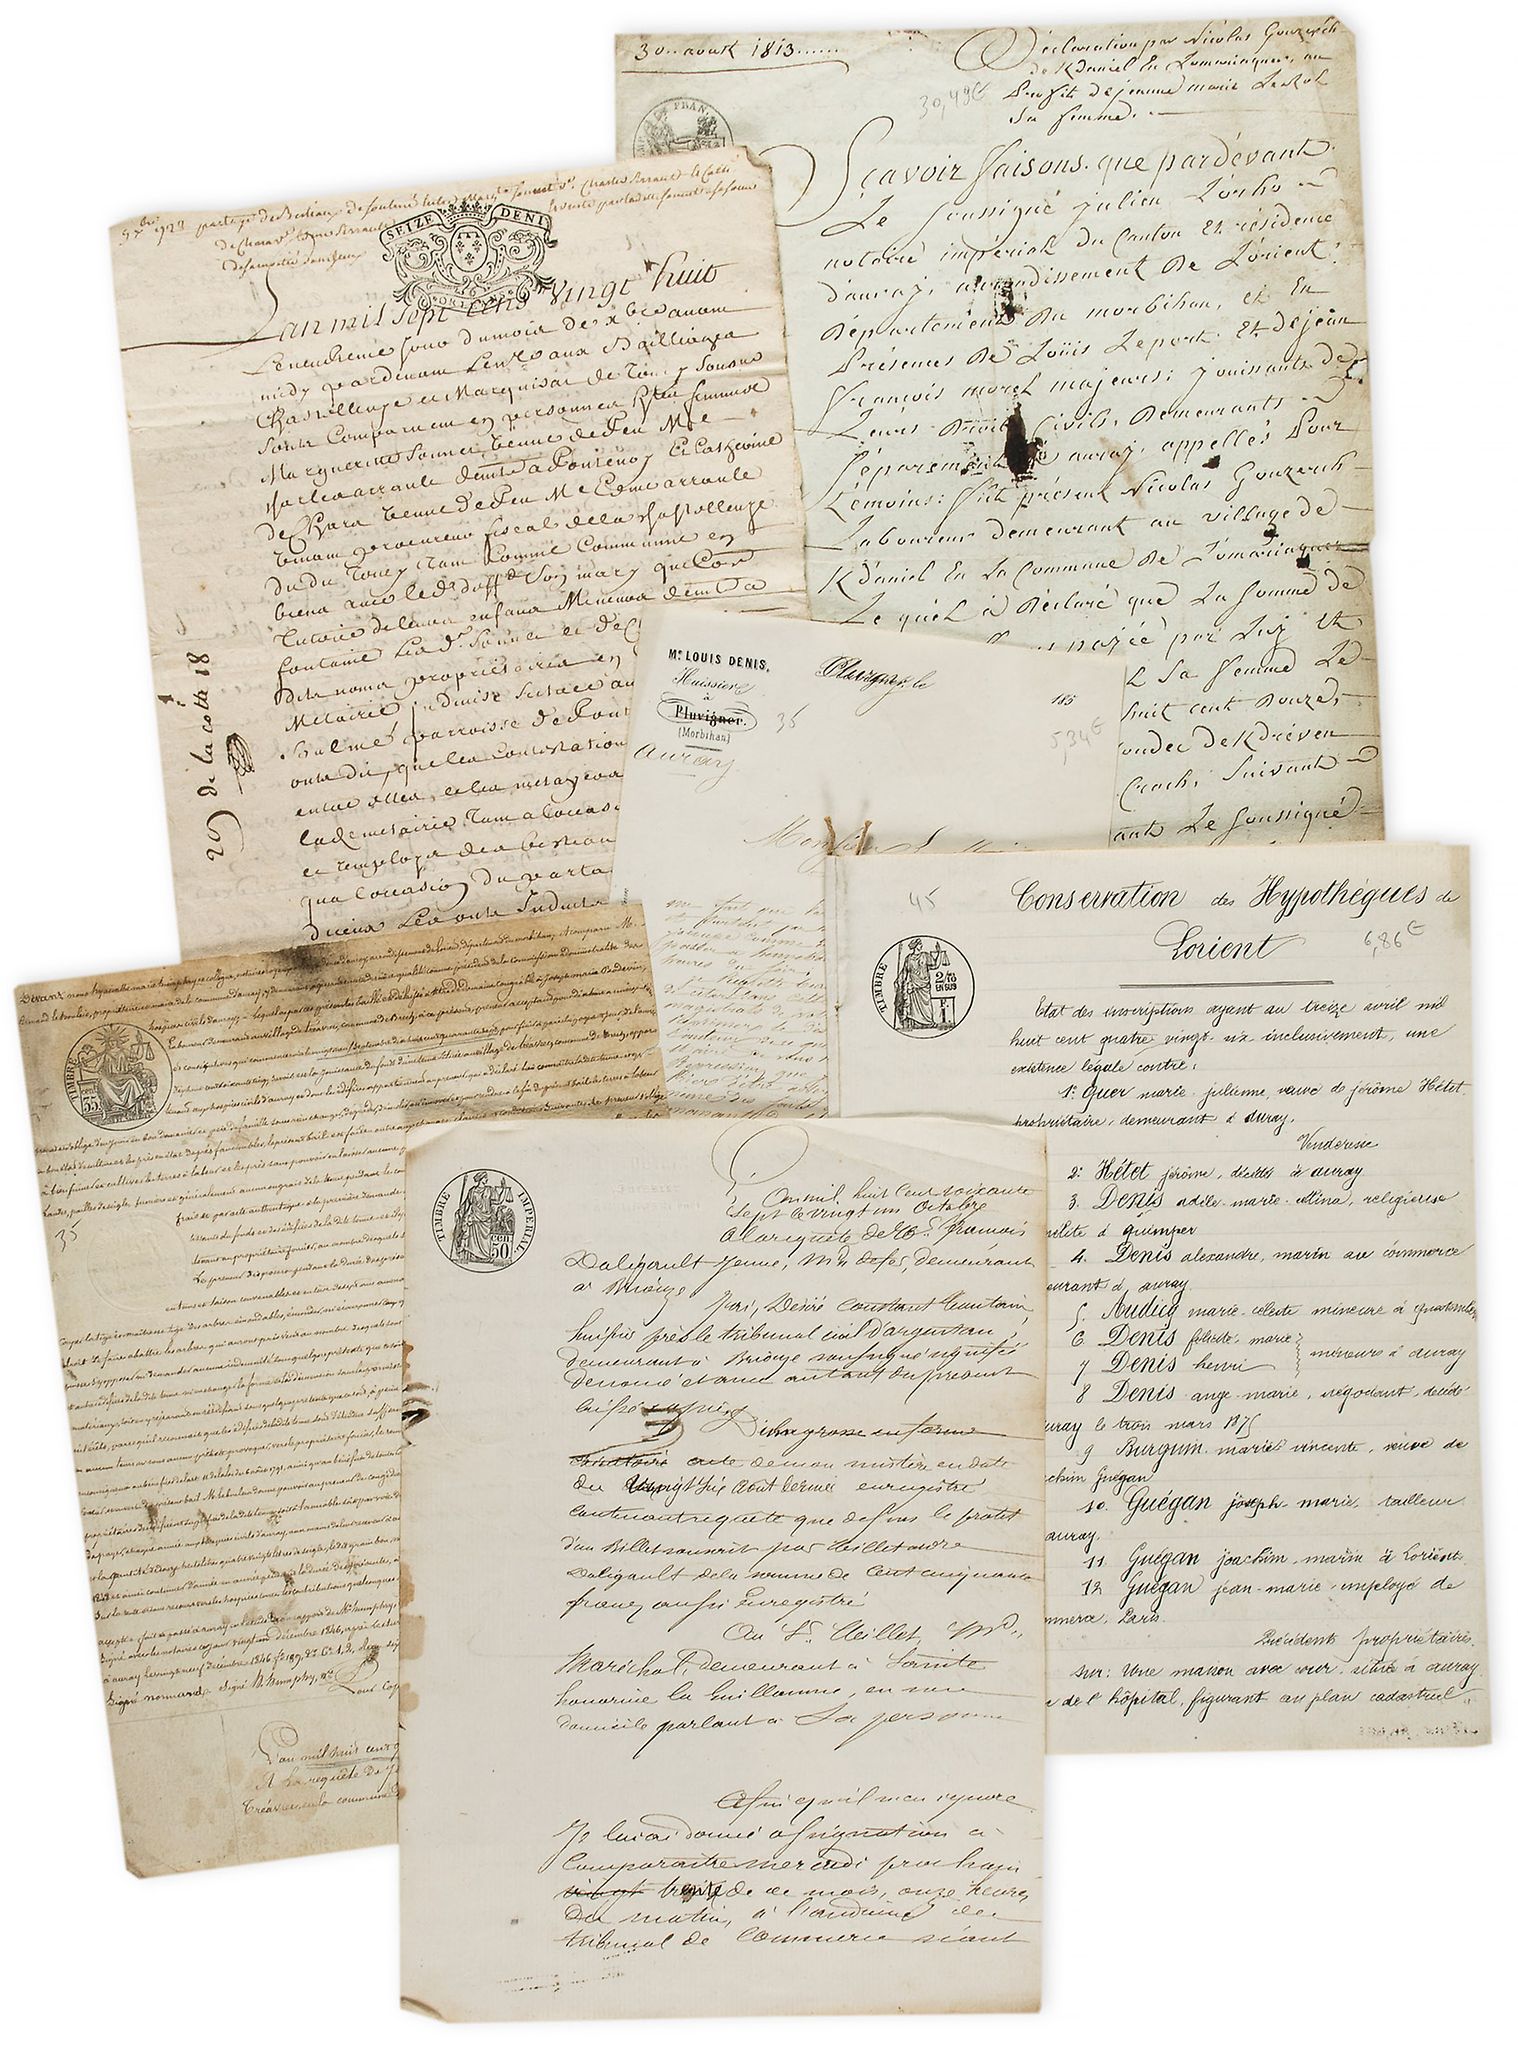 COLLECTION OF FRENCH DOCUMENTS - Large collection of French legal and administrative documents Large